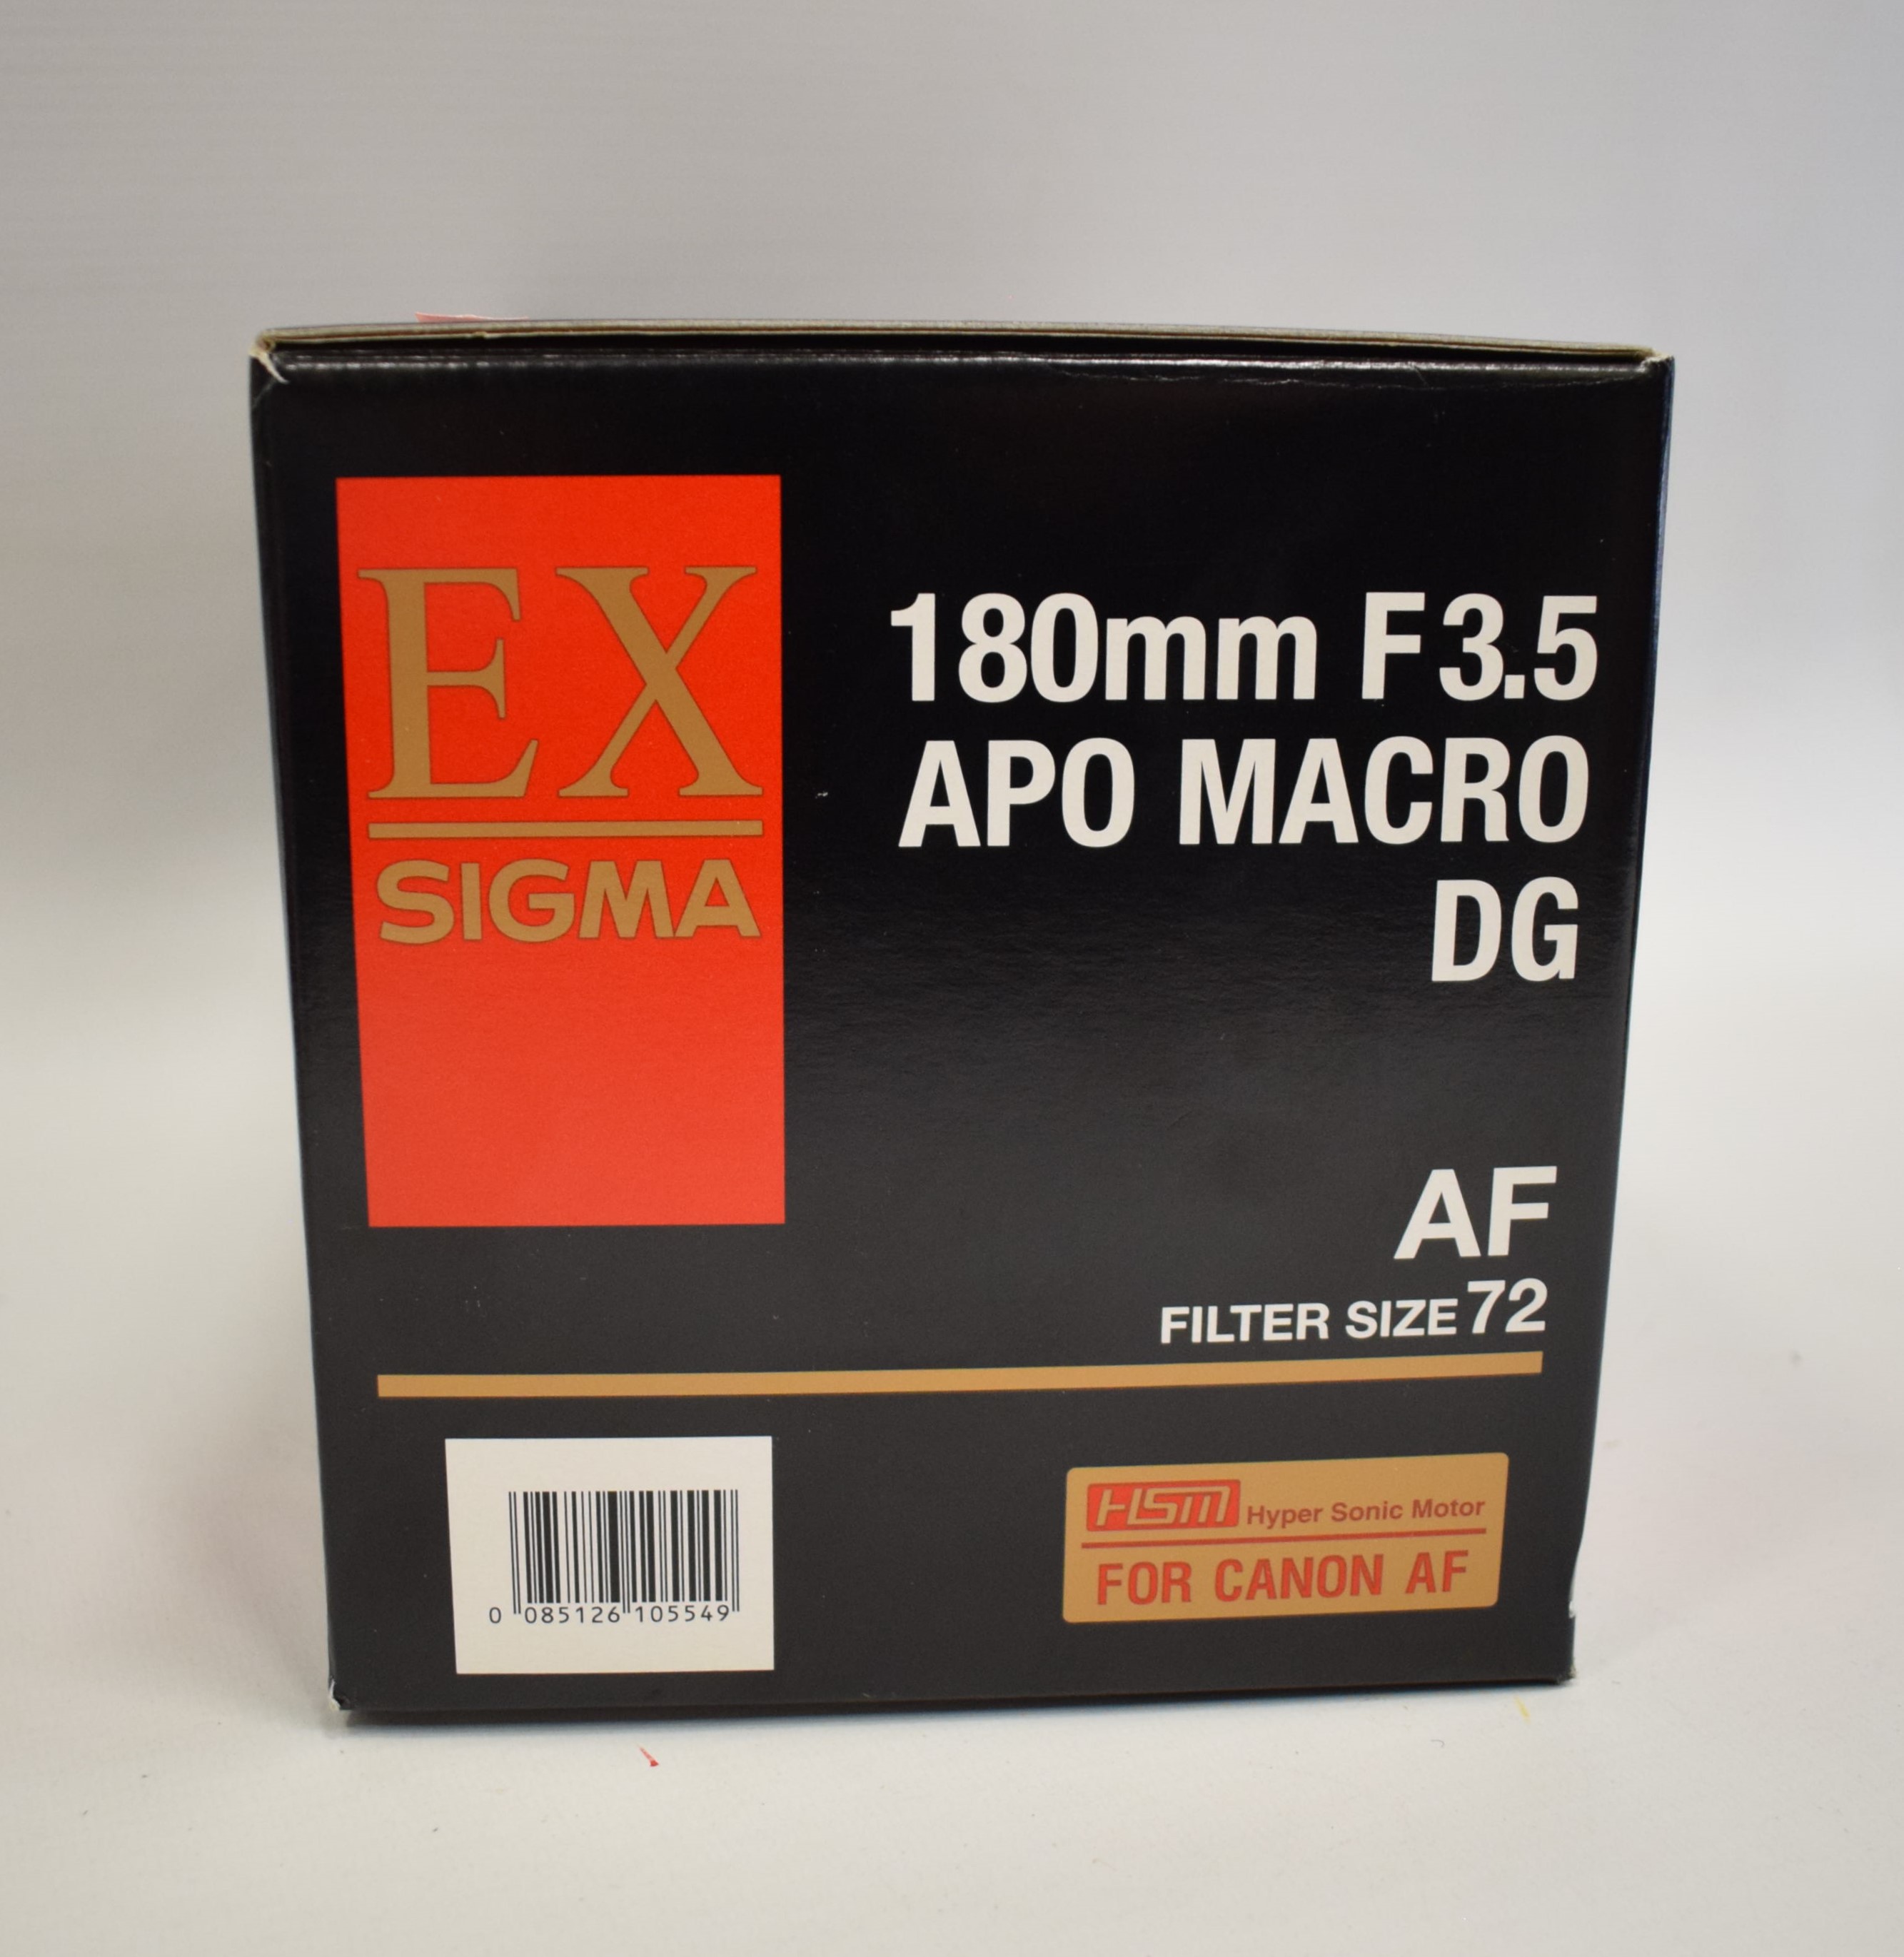 Sigma Macro DG18 F 3.5 Lens for use with Canon AF - Image 2 of 3